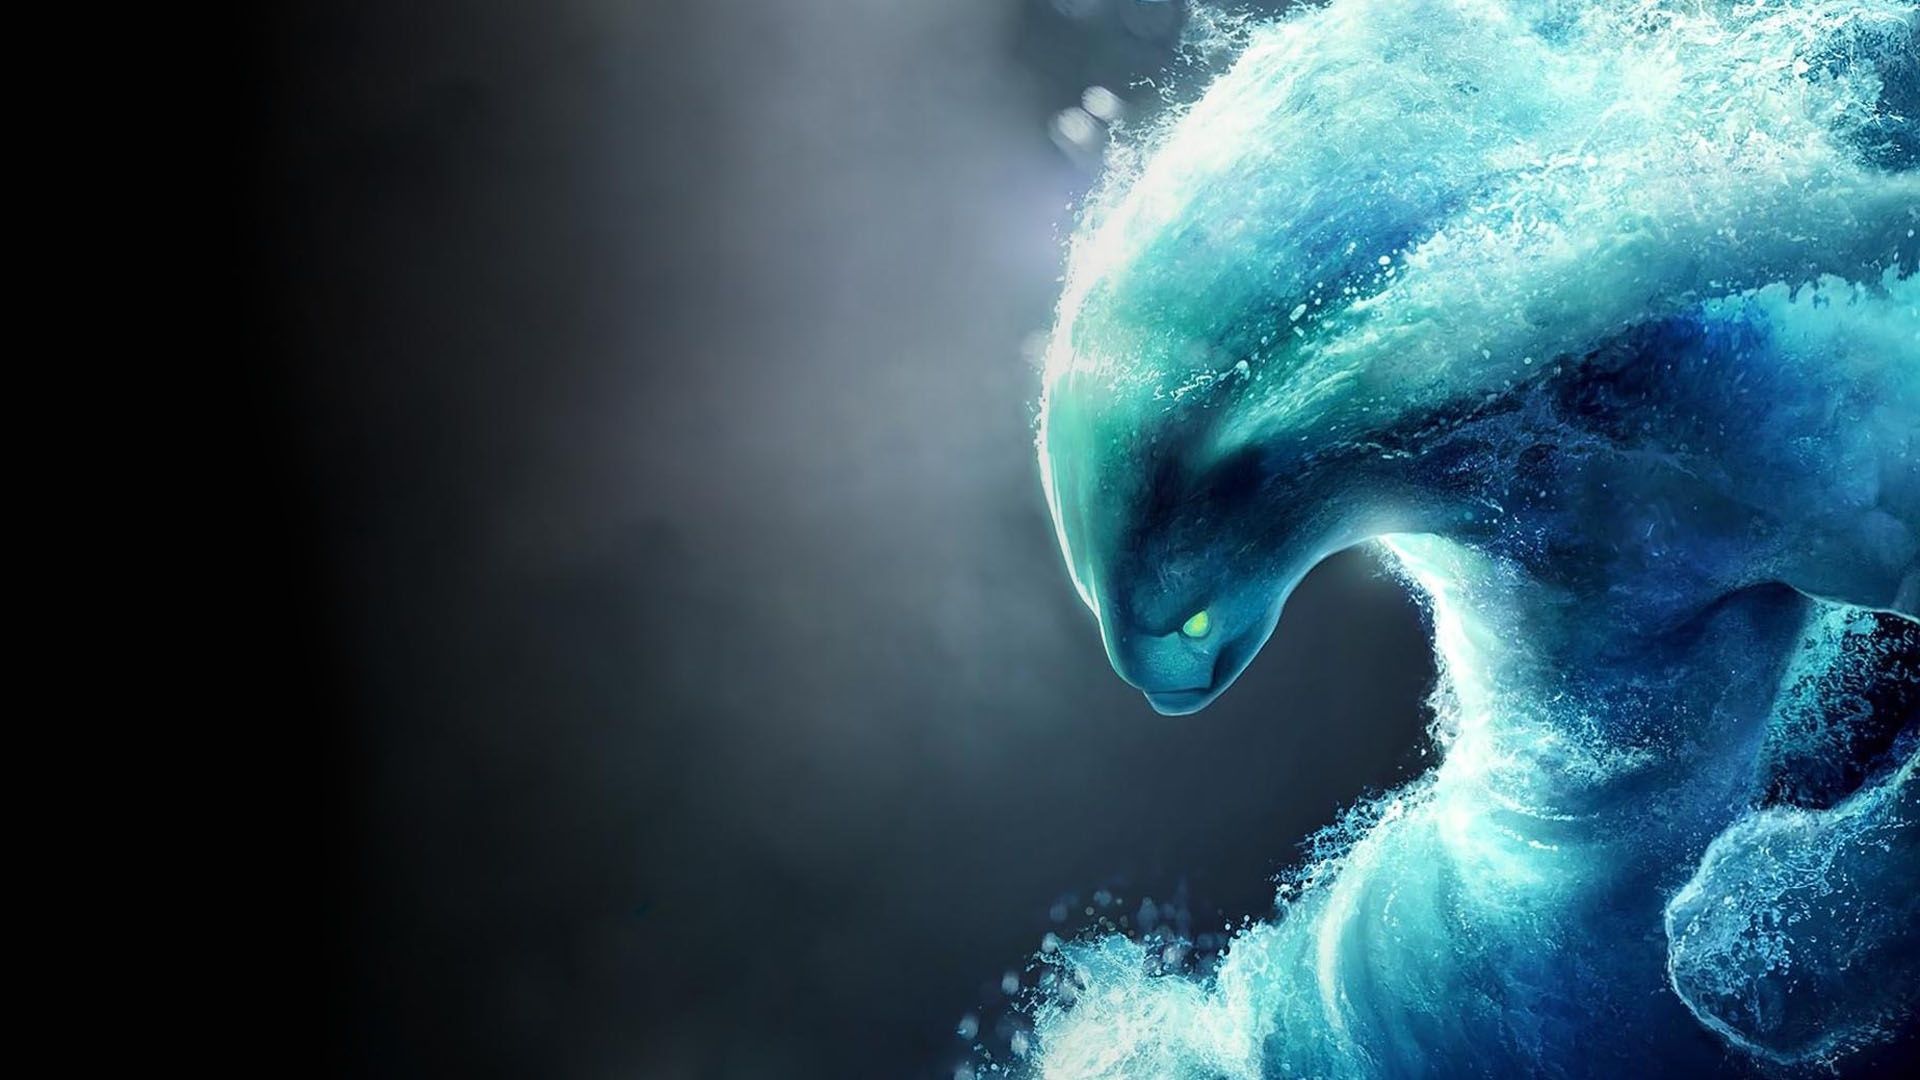 Dota 2 Game Wallpapers Best Backgrounds